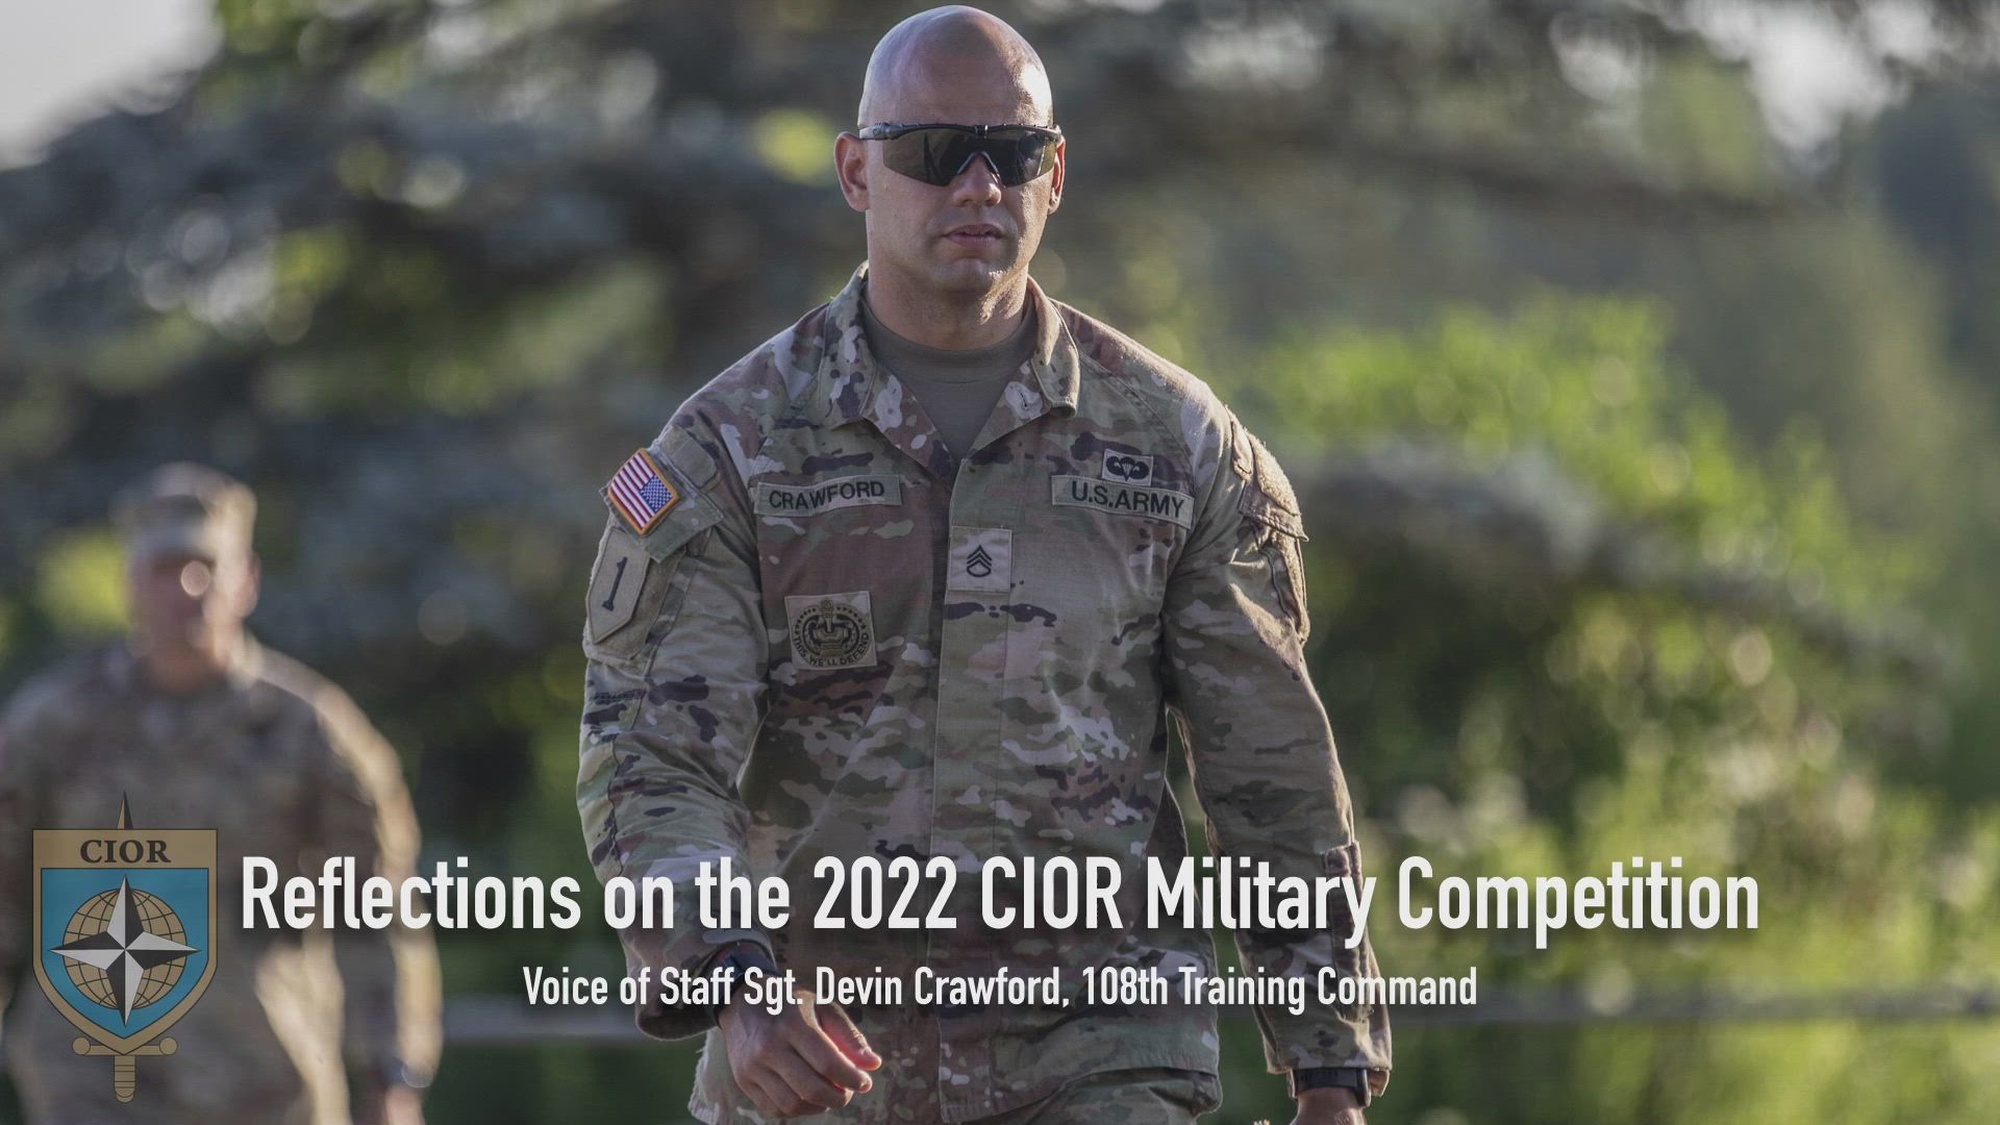 Staff Sgt. Devin Crawford, 108th Training Command, reflects on his experience during the Interallied Confederation of Reserve Officers Military Competition (CIOR MILCOMP). This competition is an annual reserve military competition with NATO member states and other participating nations with 34 countries in total, representing 1.3 million reservists. The MILCOMP, which has been held since 1957, is a military pentathlon testing service members in pistol and rifle marksmanship, land and water obstacles and orienteering.